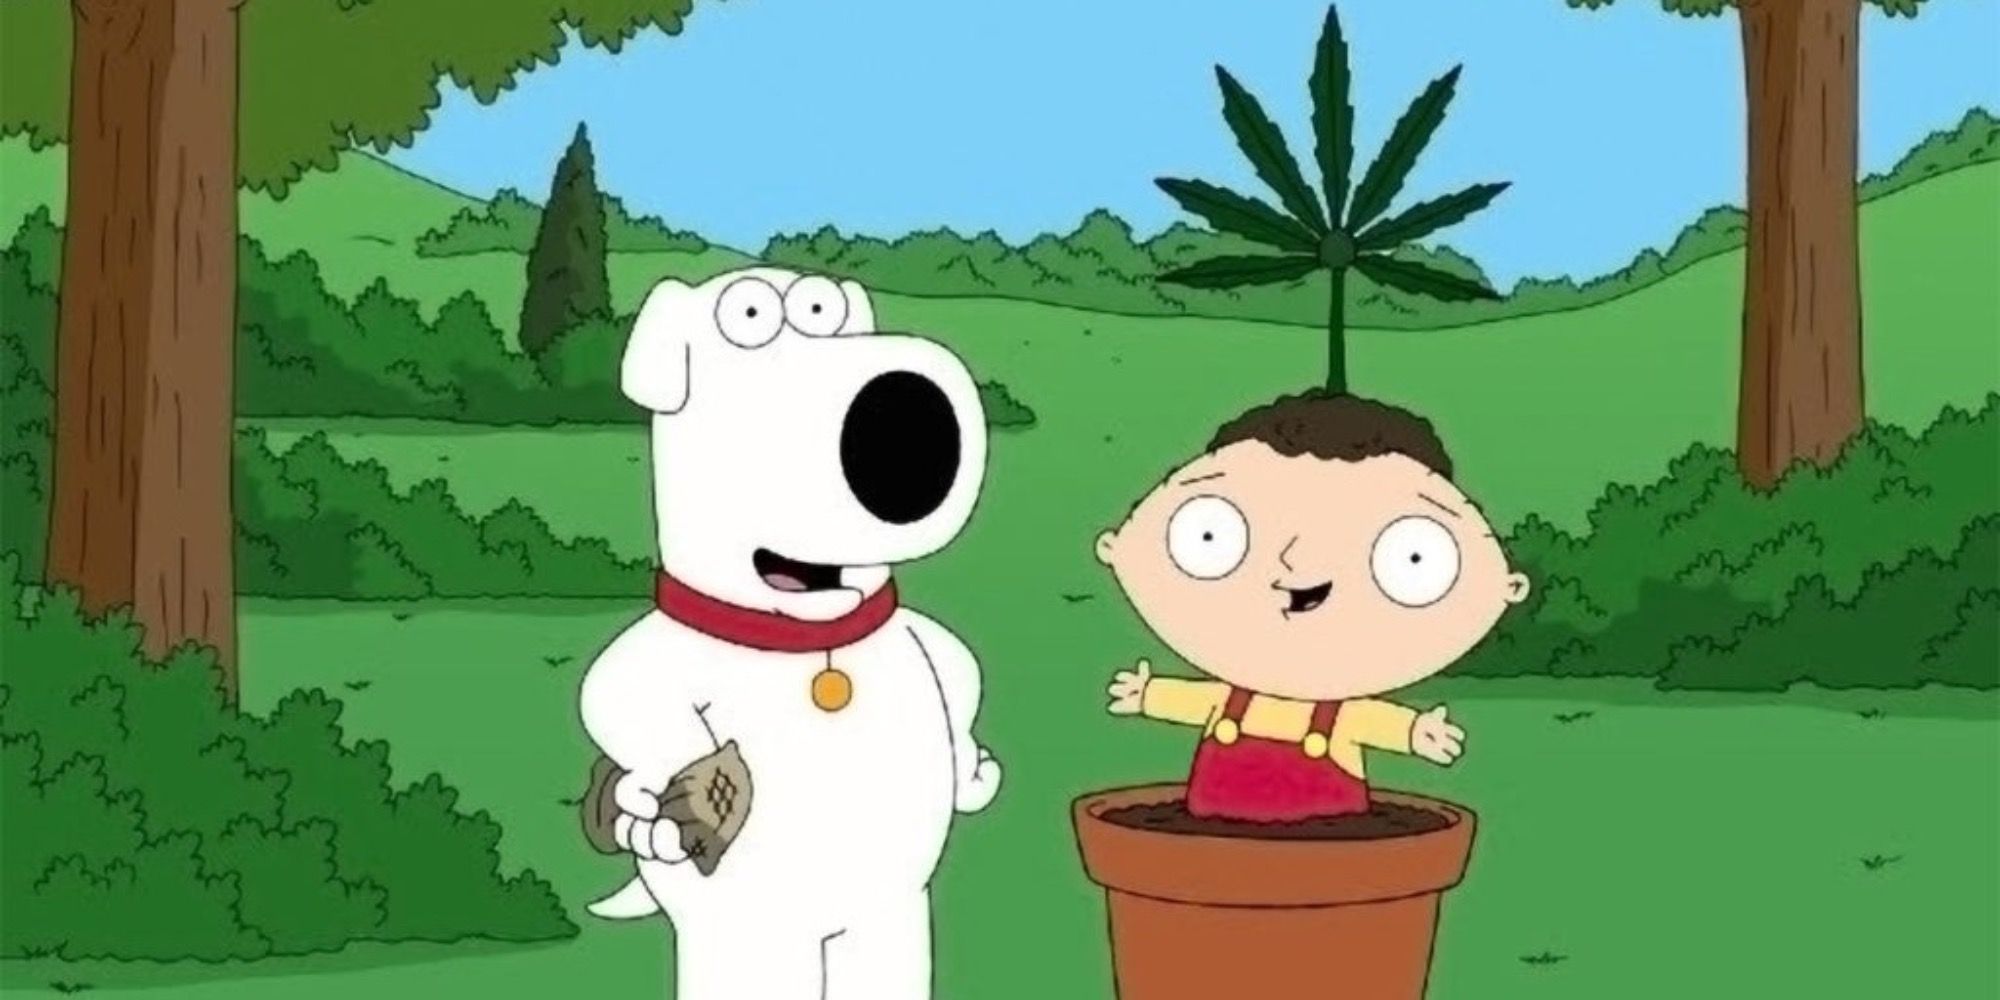 Brian standing next to Stewie, who is in a pot plant